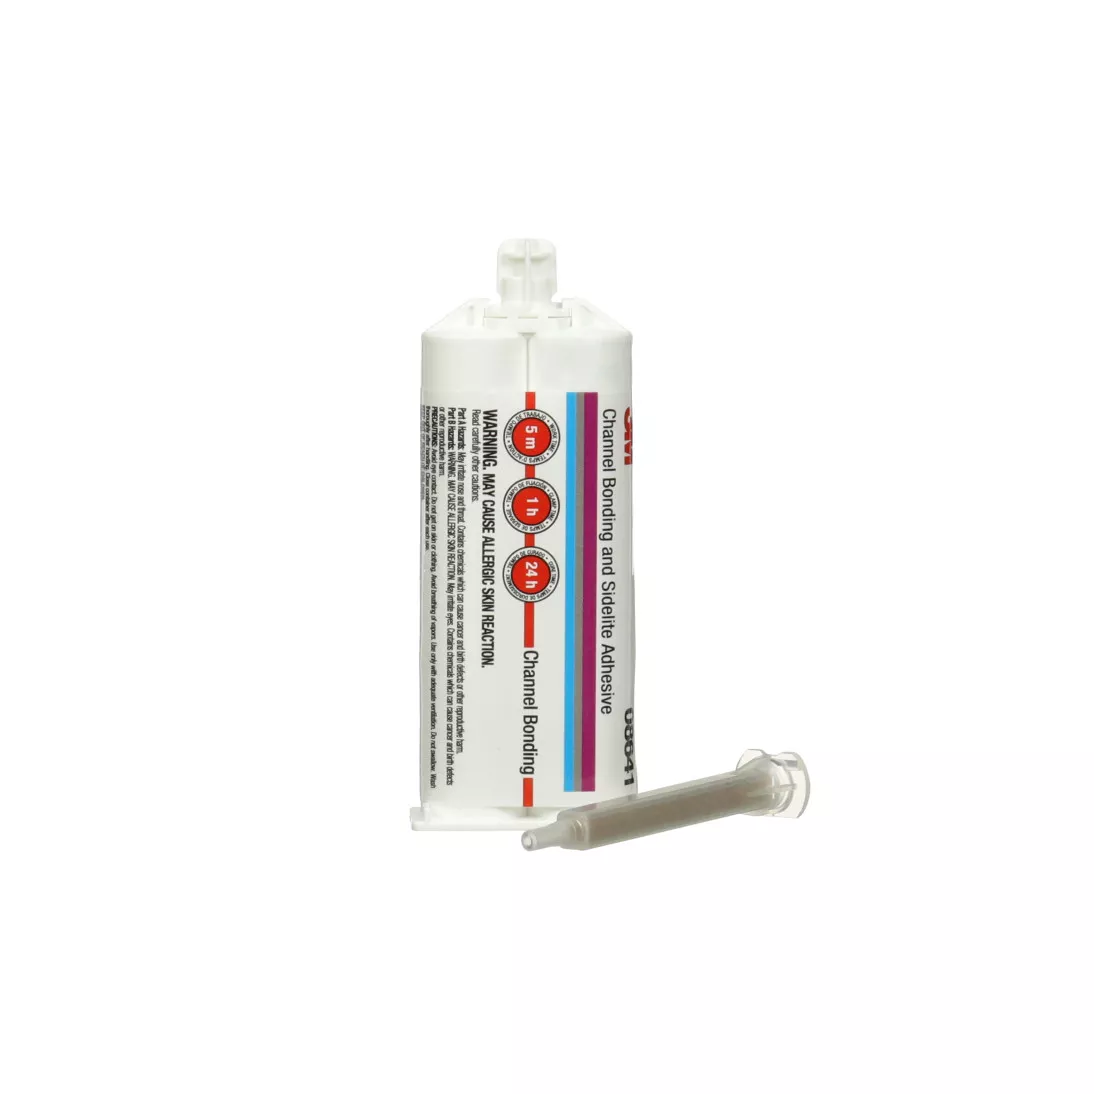 3M™ Channel Bonding and Sidelite Adhesive, 08641, 47.3 mL Cartridge, 6
per case